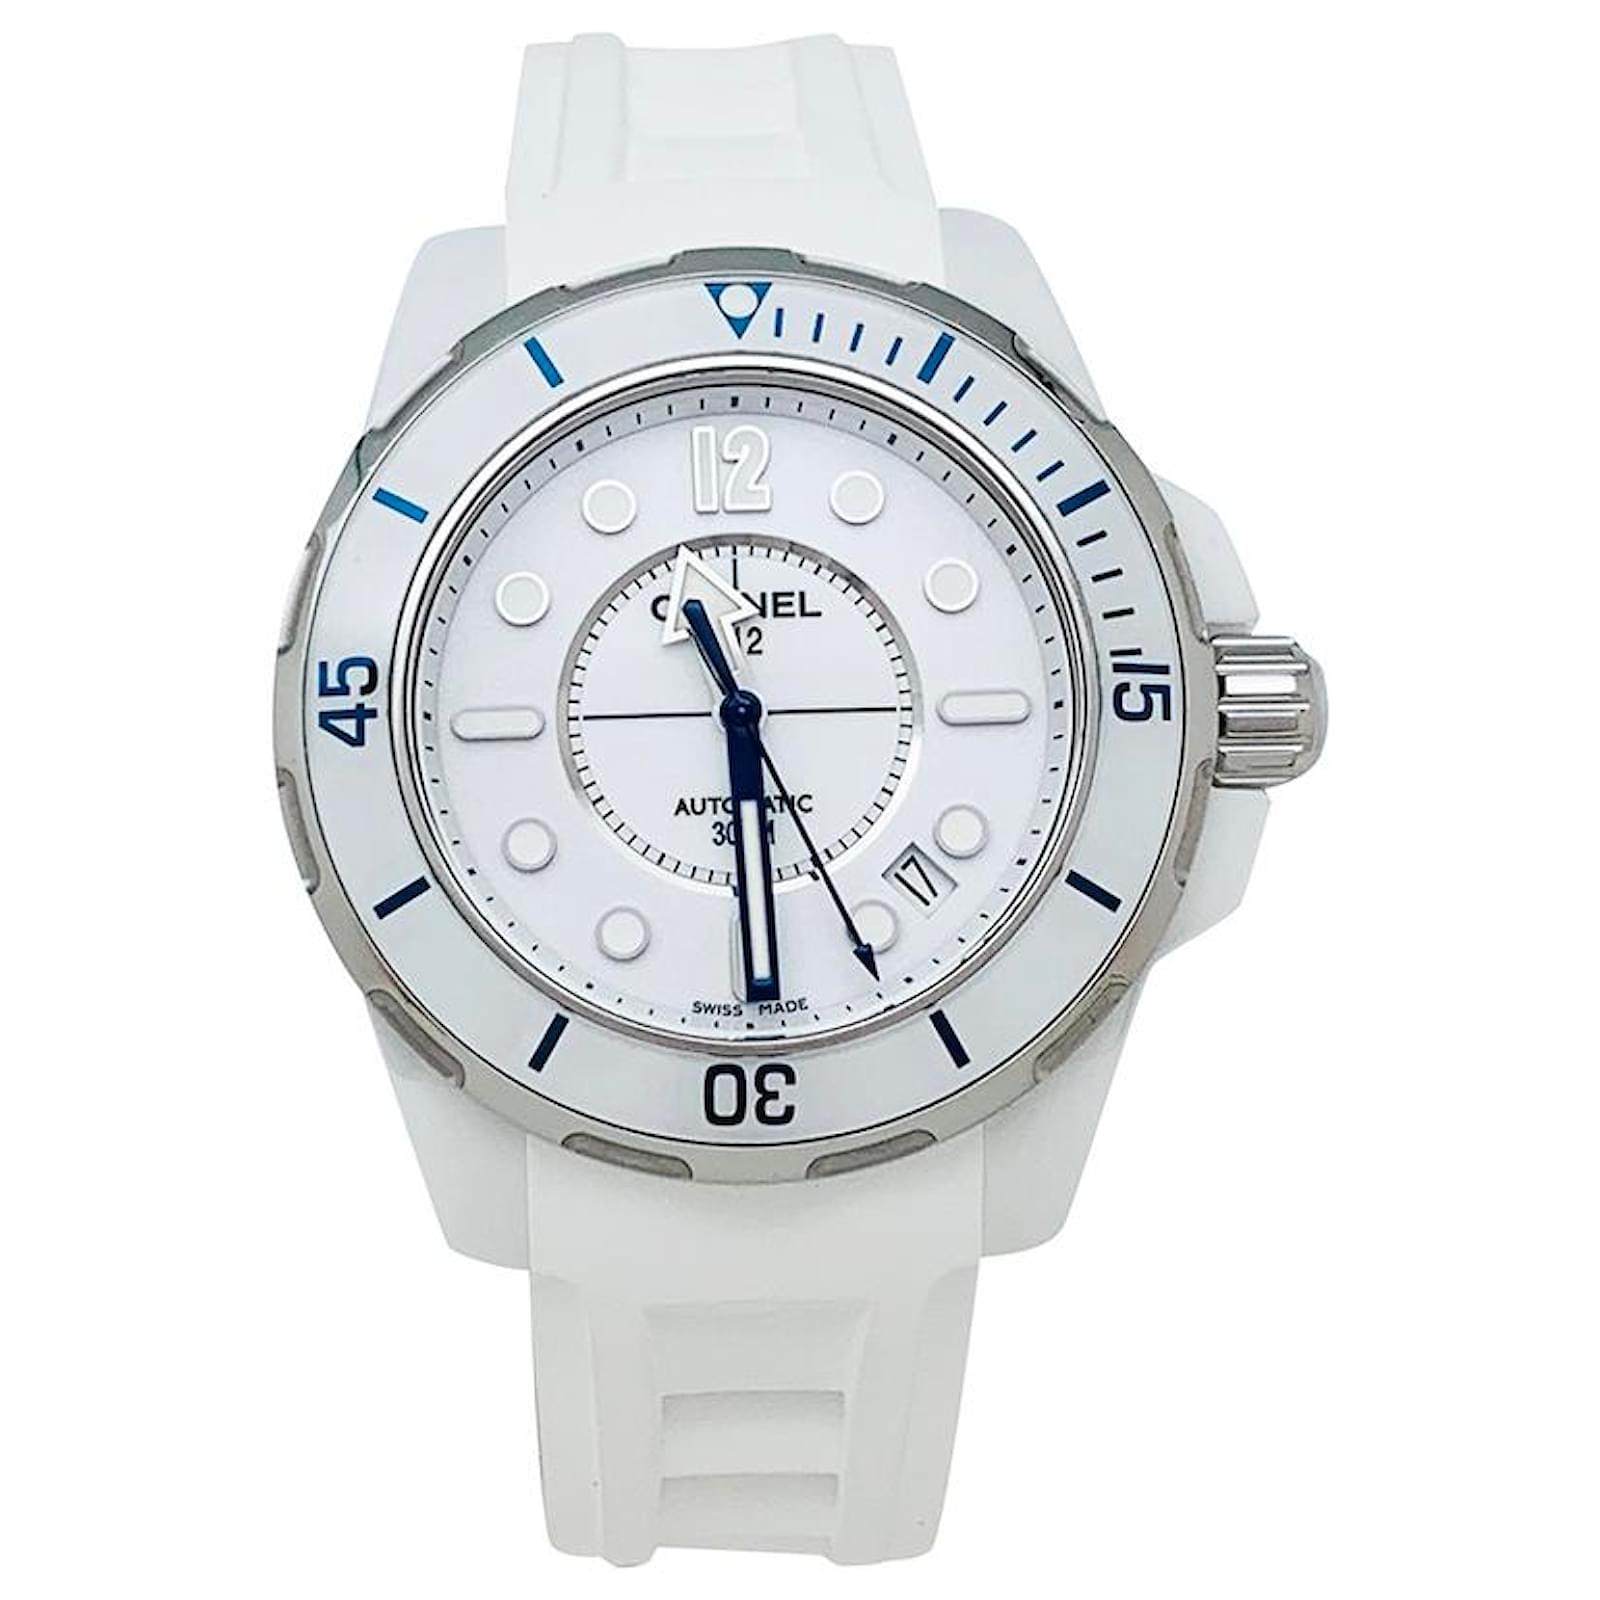 Chanel J watch12 Marine in steel and ceramic and white rubber